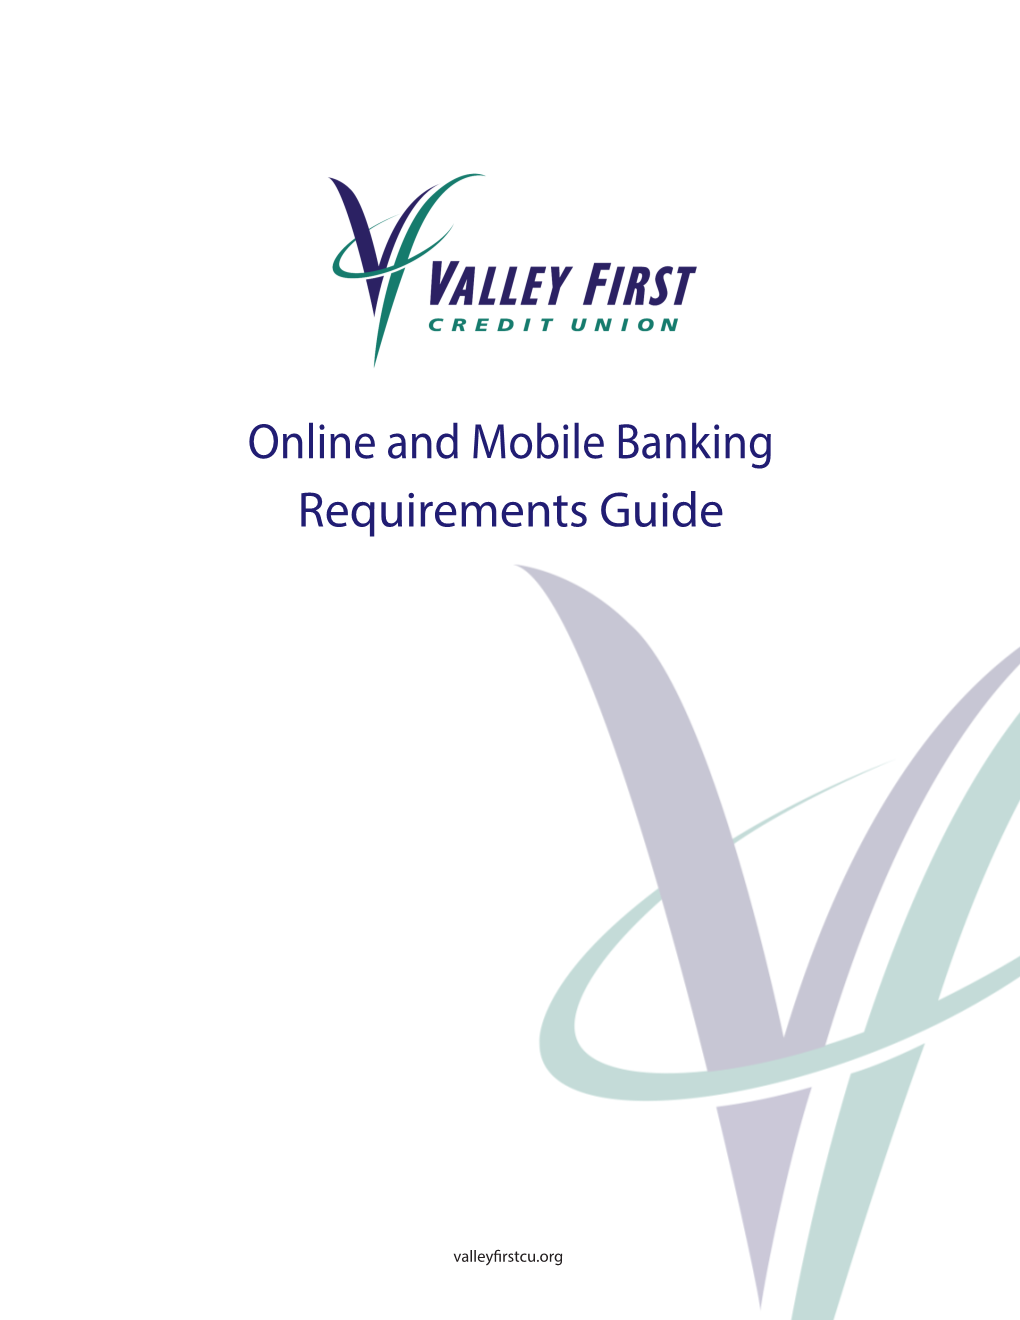 Online and Mobile Banking Requirements Guide